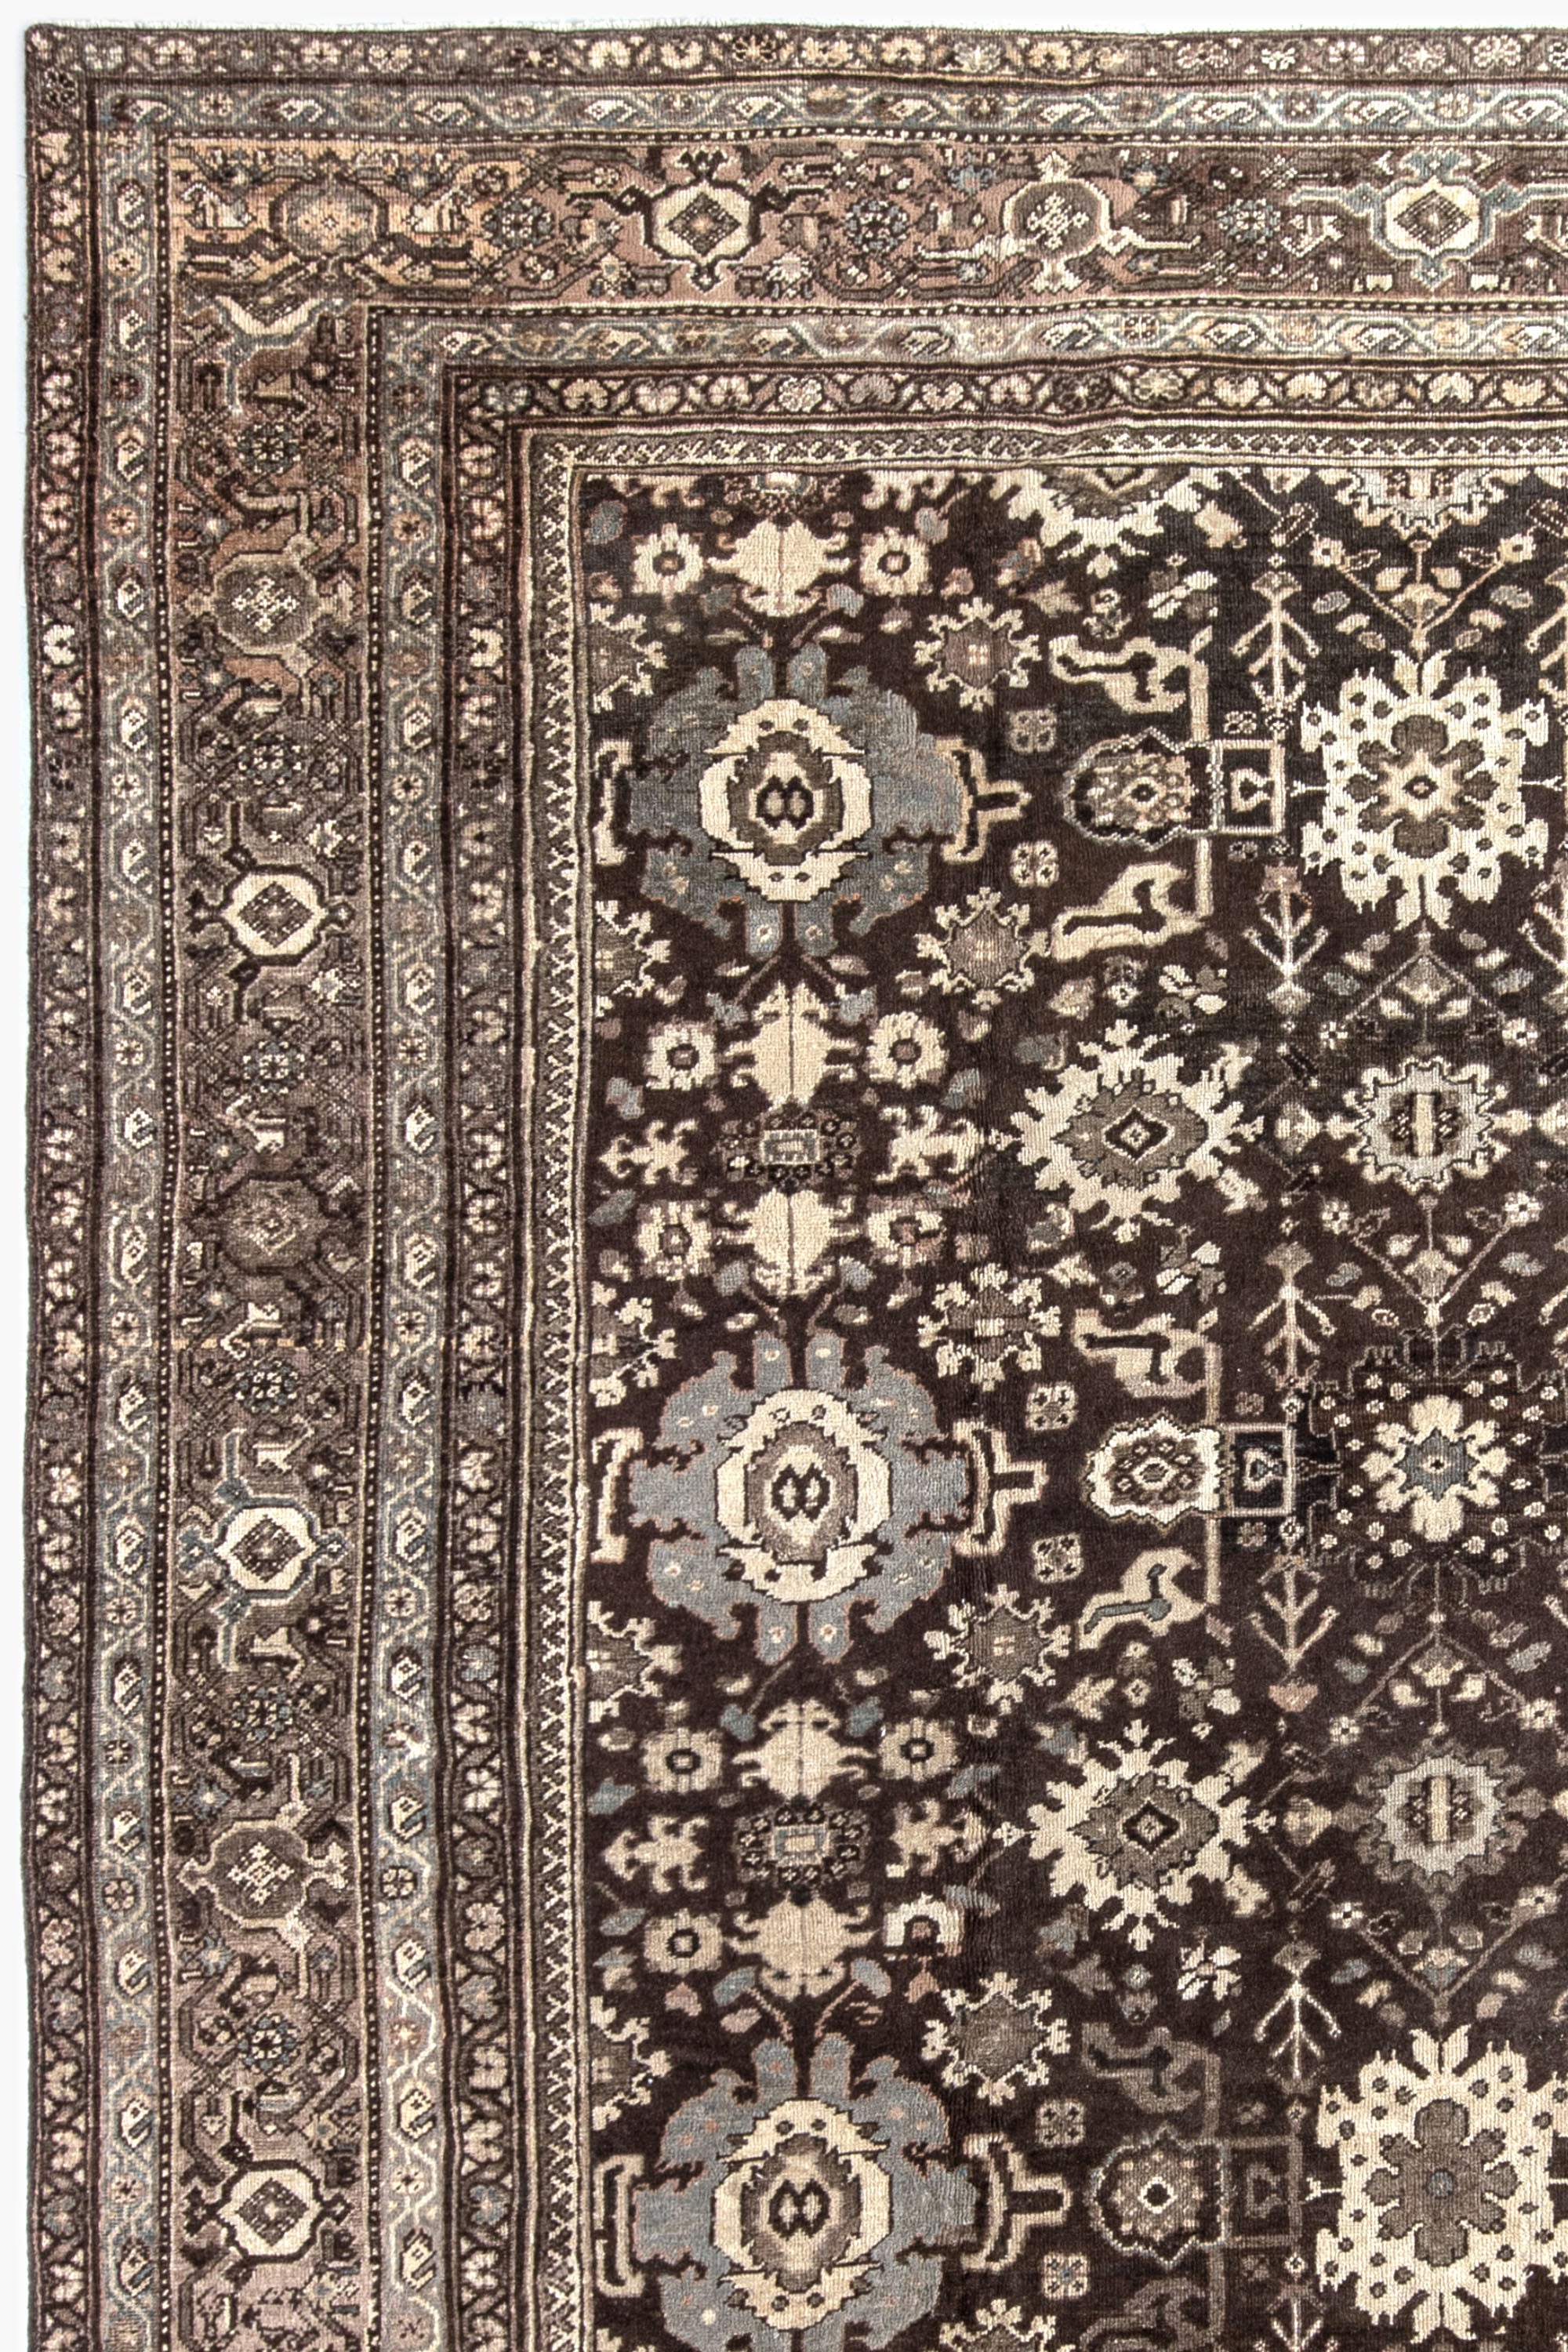 SULTANABAD RUG,AR31054/2581, WEST PERSIA, 10'10" X 21'8" - thumbnail 2